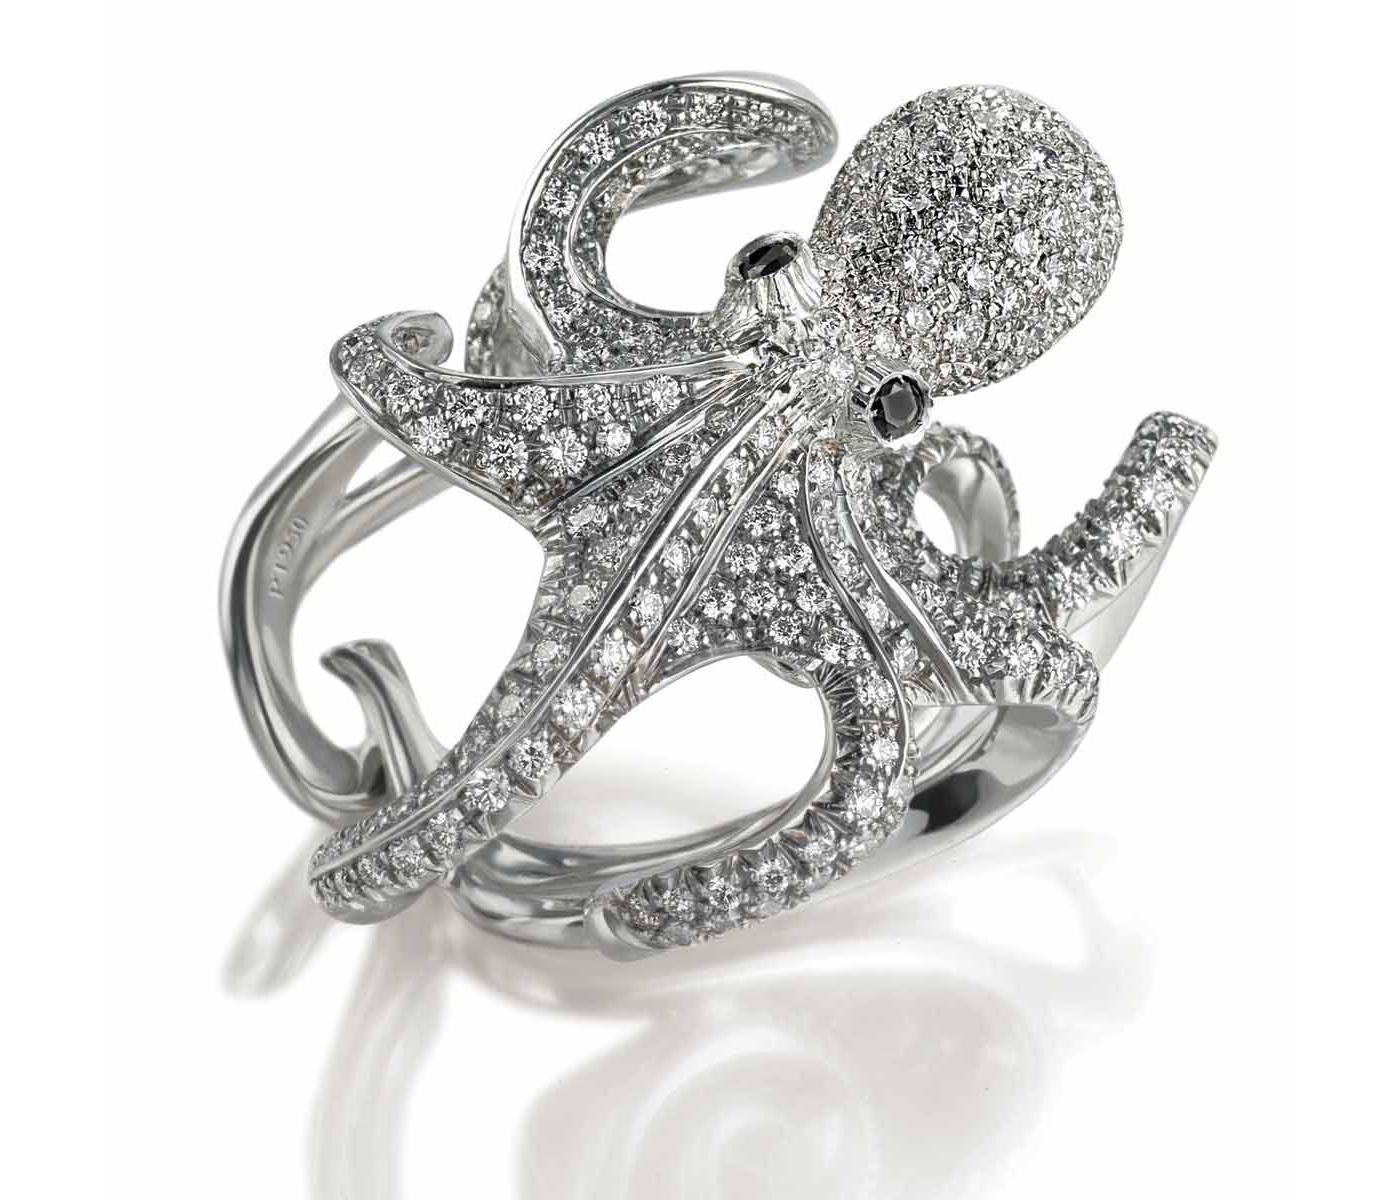 Ring by Scavia